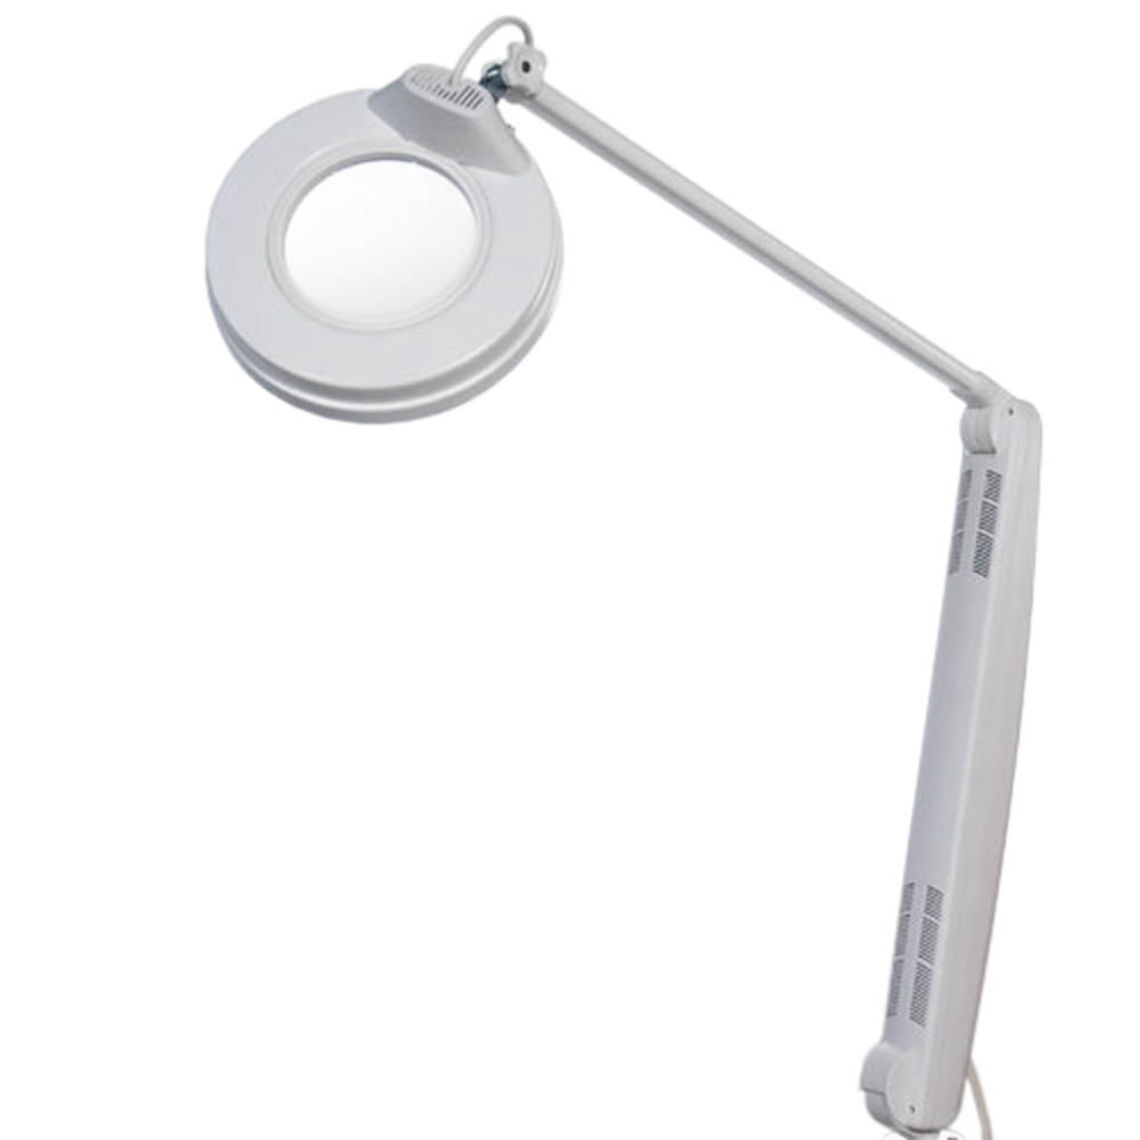 Spavision | Magnifying Lamp Deluxe NEO LED White, 3.5 Diopter